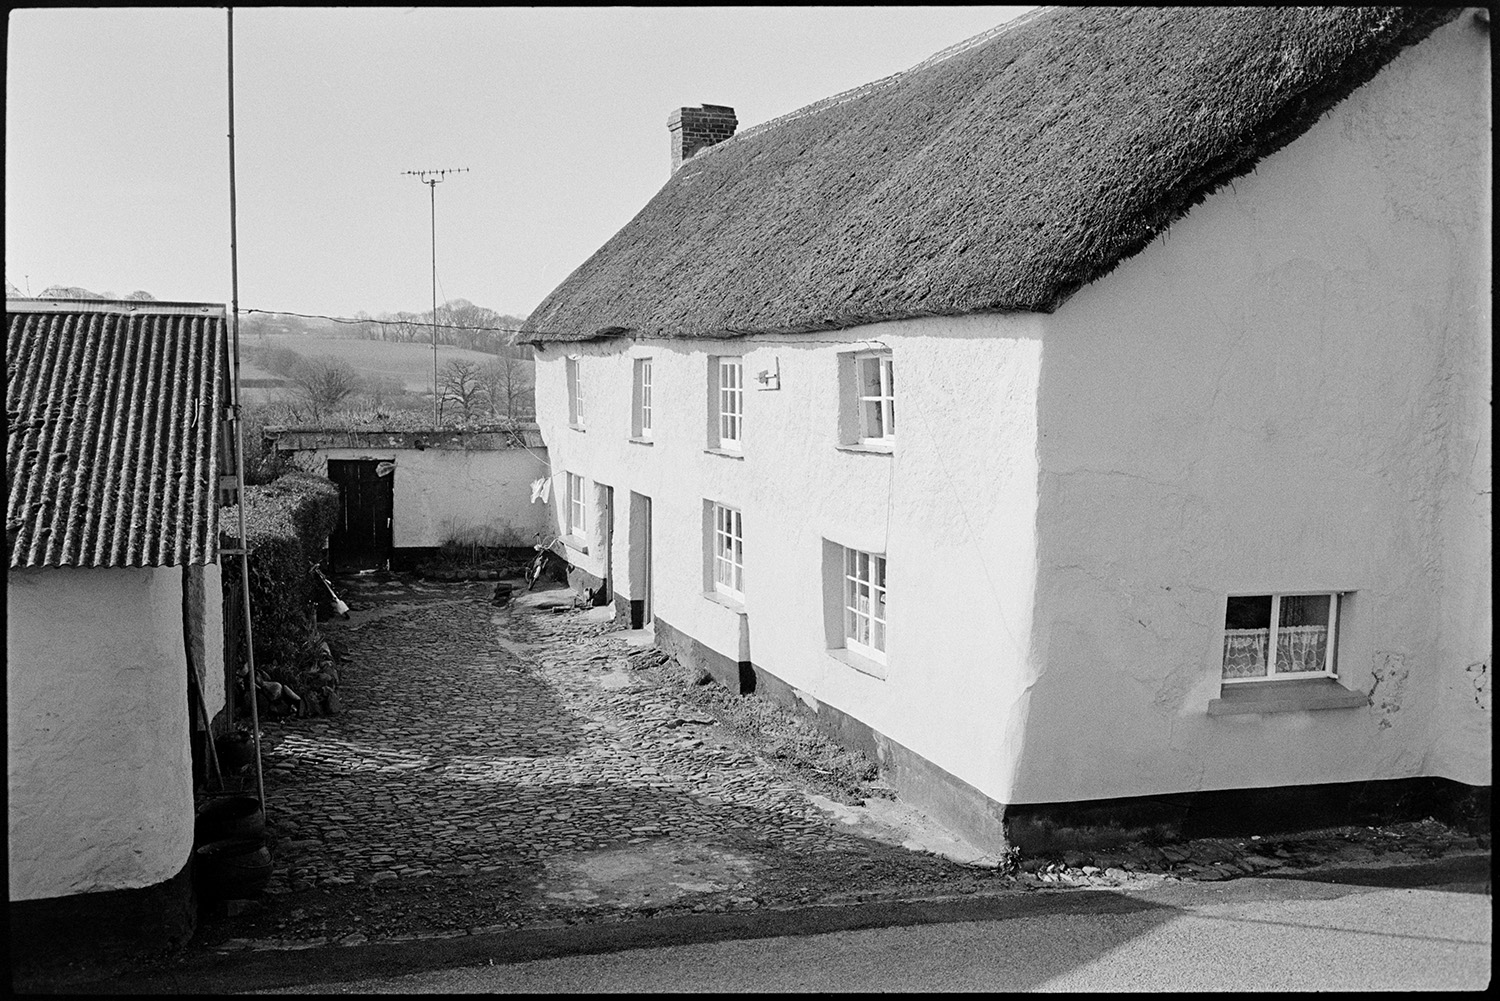 Cob and thatch cottages. 
[Cob and thatch cottages with a cobbled yard outside at Monkokehampton.]